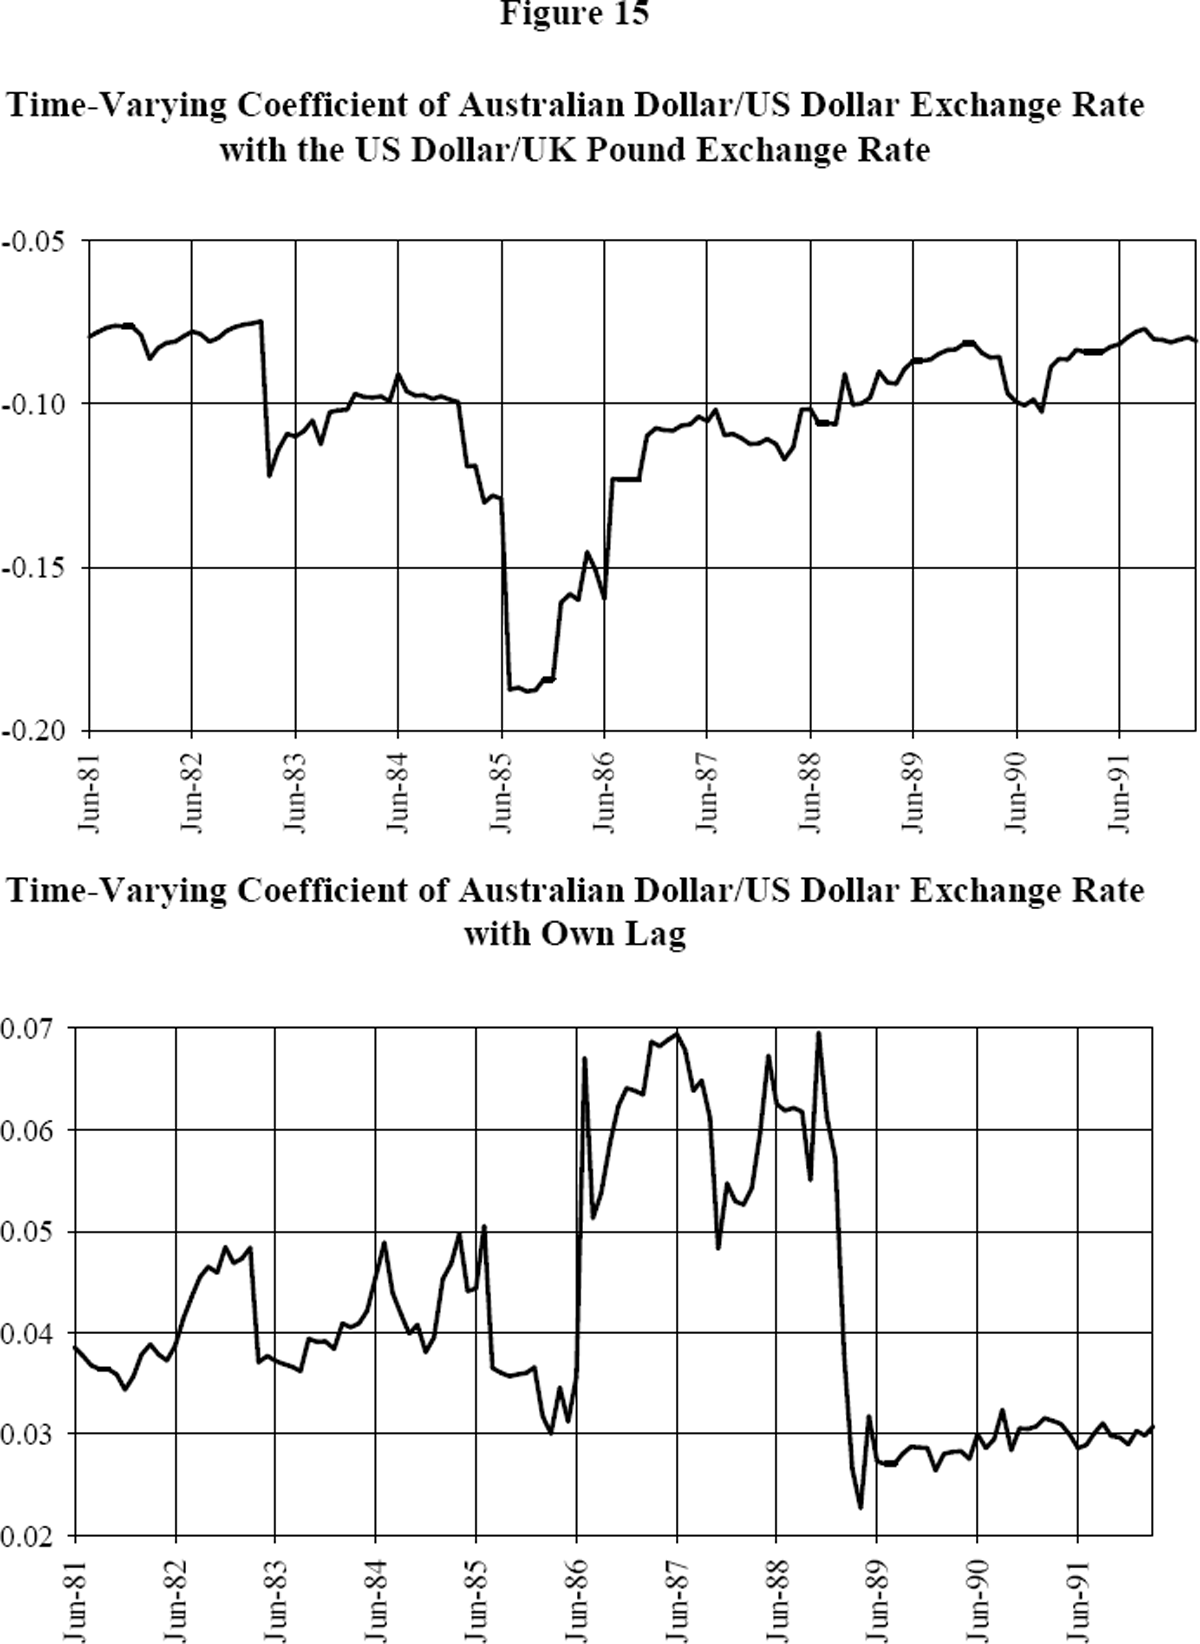 Figure 15: Time-Varying Coefficient of Australian Dollar/US Dollar Exchange Rate with the US Dollar/UK Pound Exchange Rate and Own Lag